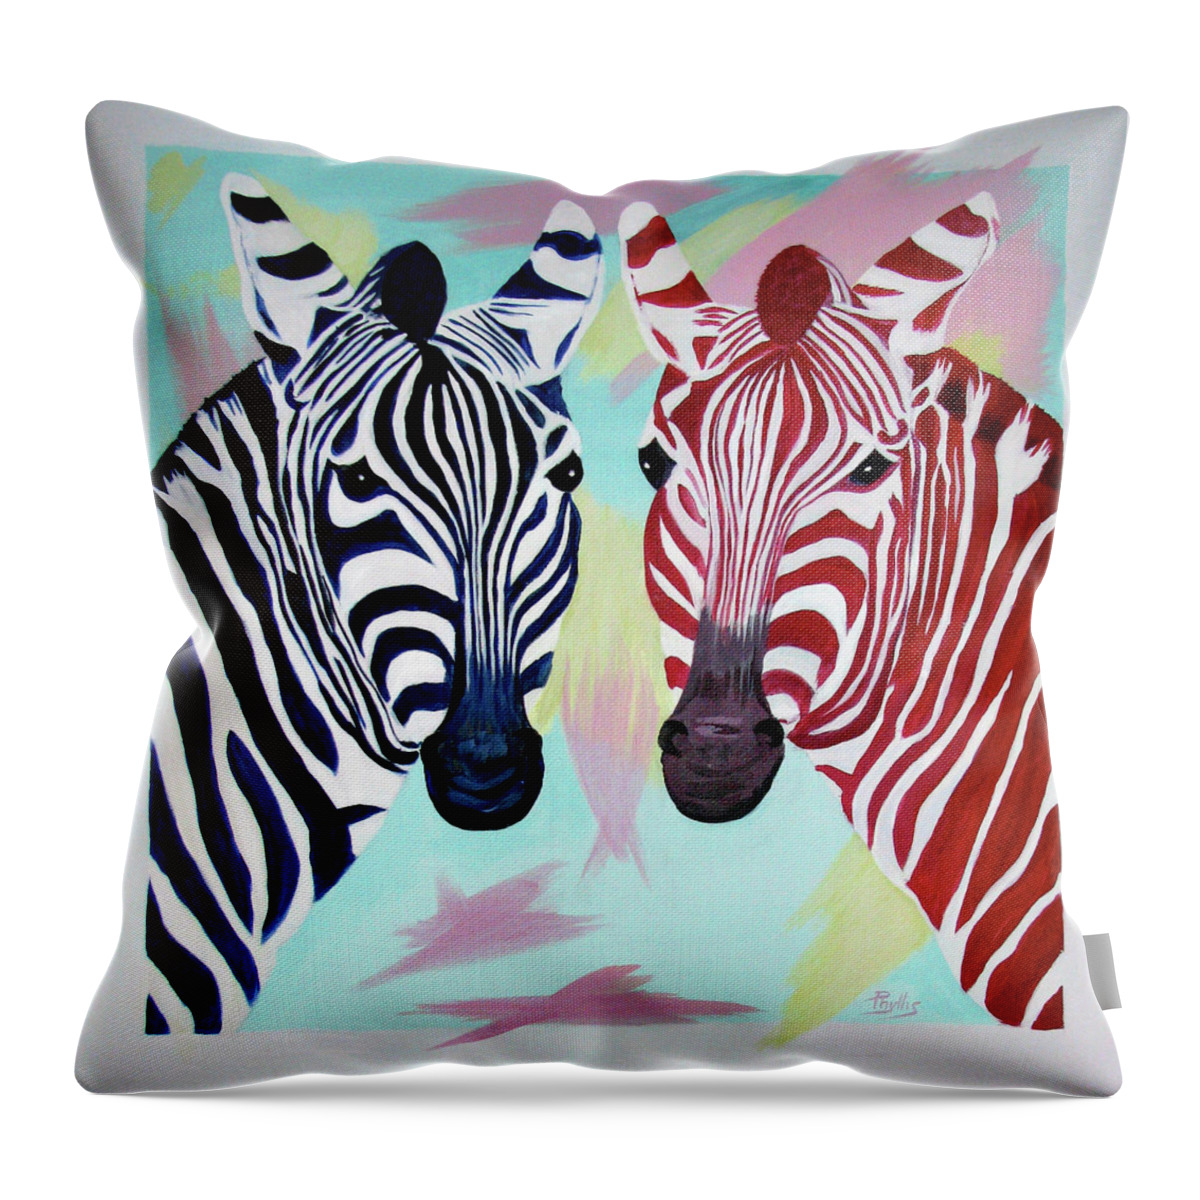 Zebras Throw Pillow featuring the painting Twin zs by Phyllis Kaltenbach